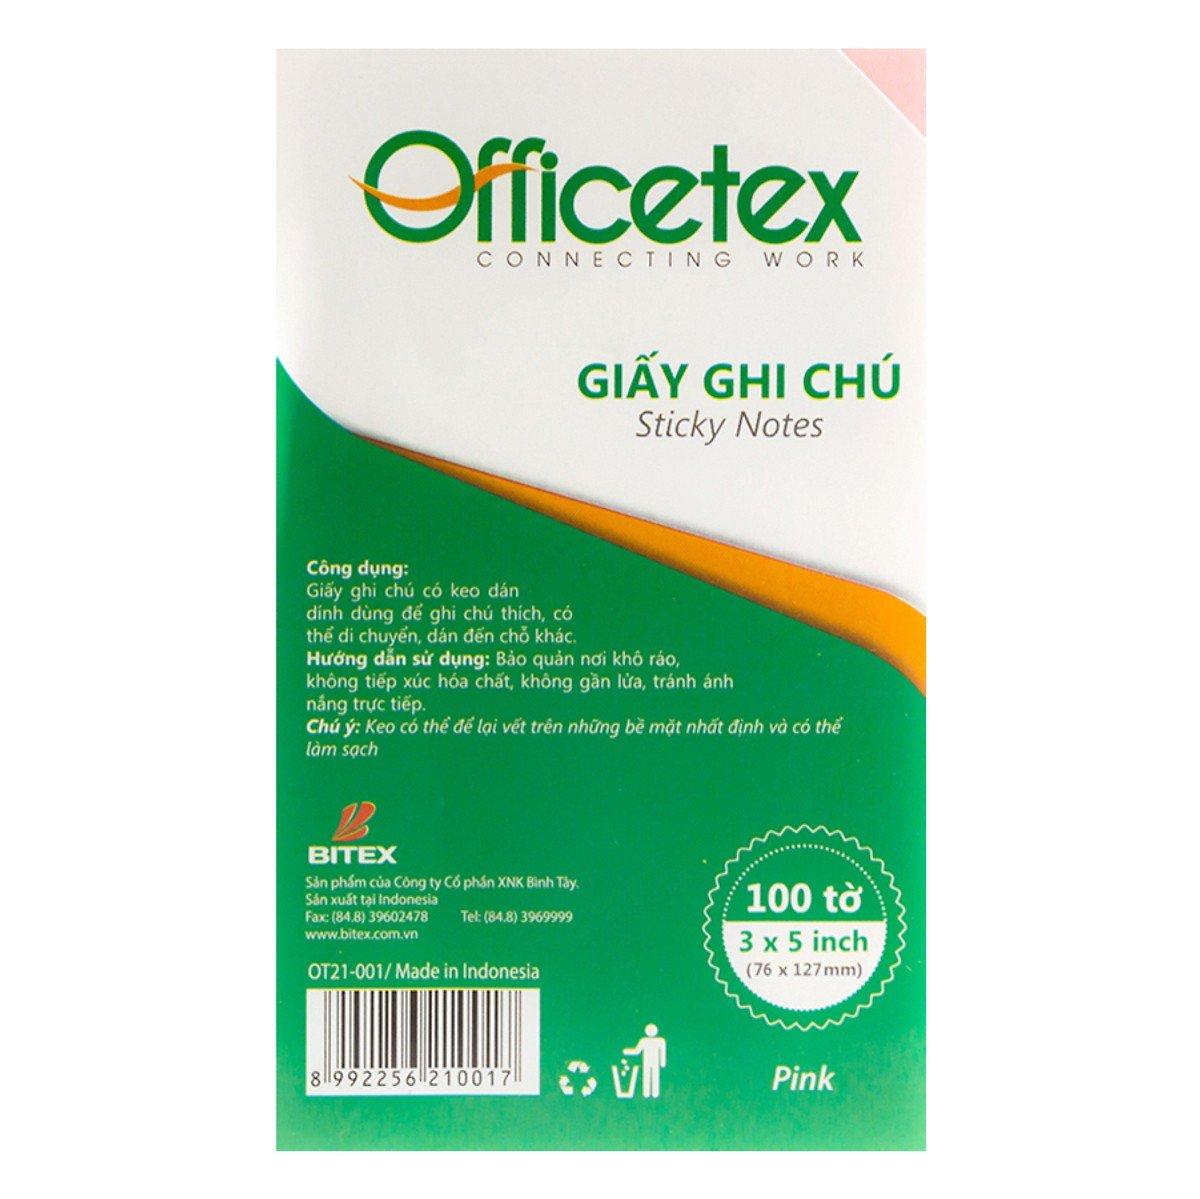 Giấy Ghi Chú Officetex - Pink (3x5 inch)